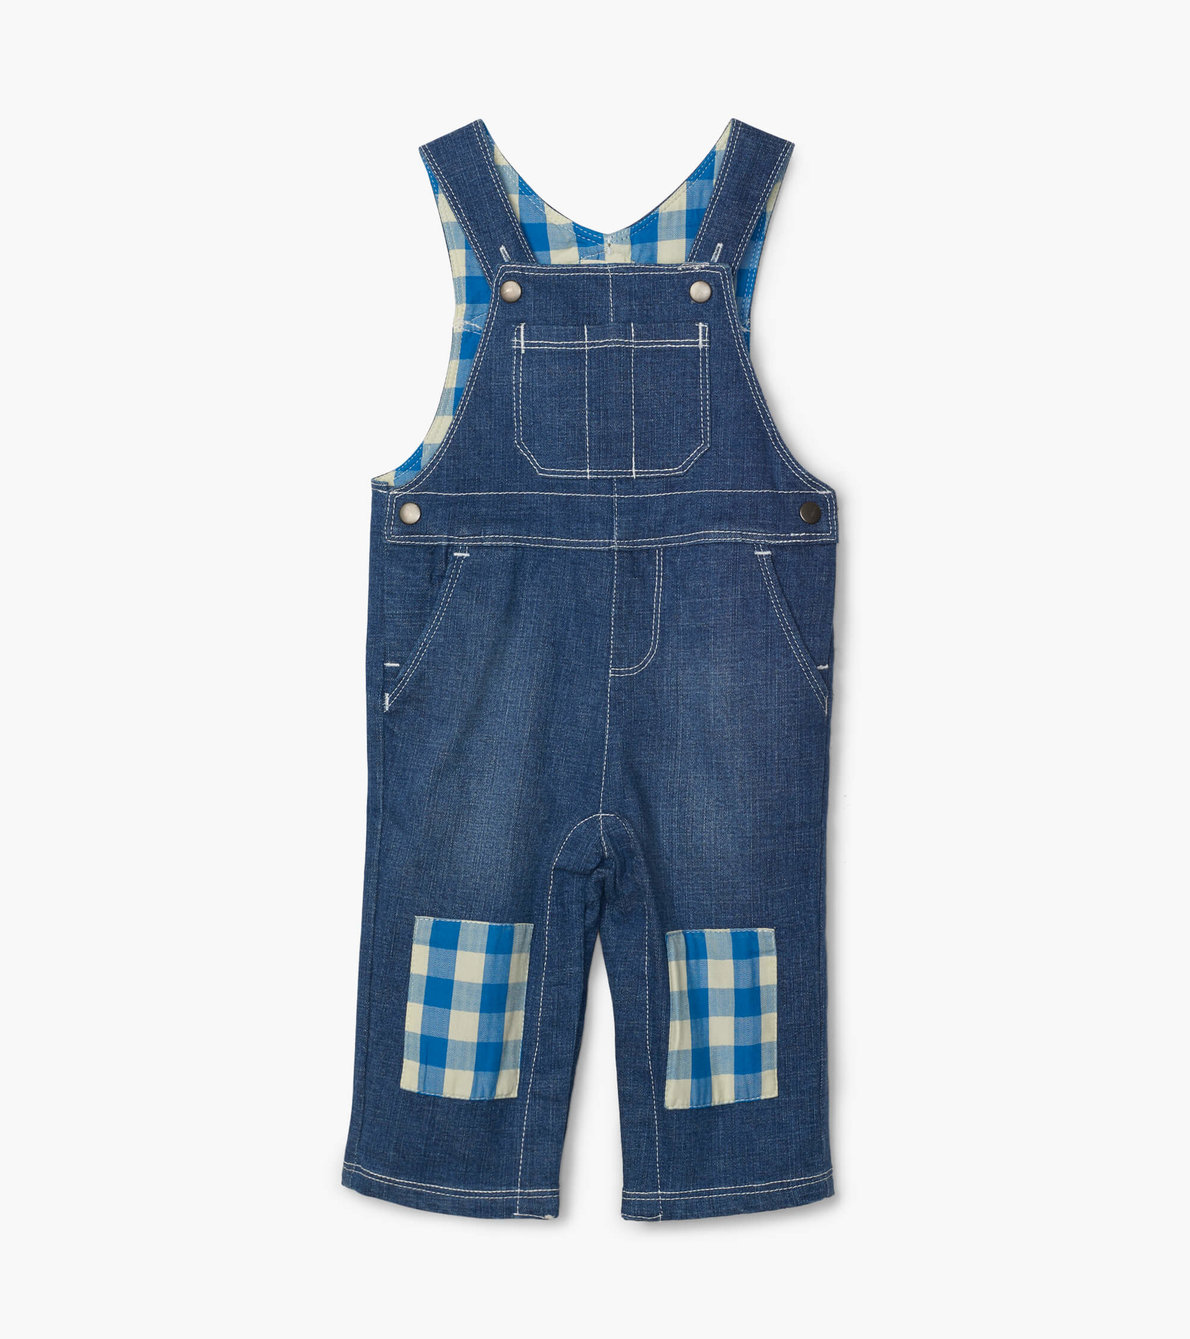 View larger image of Denim Baby Overalls